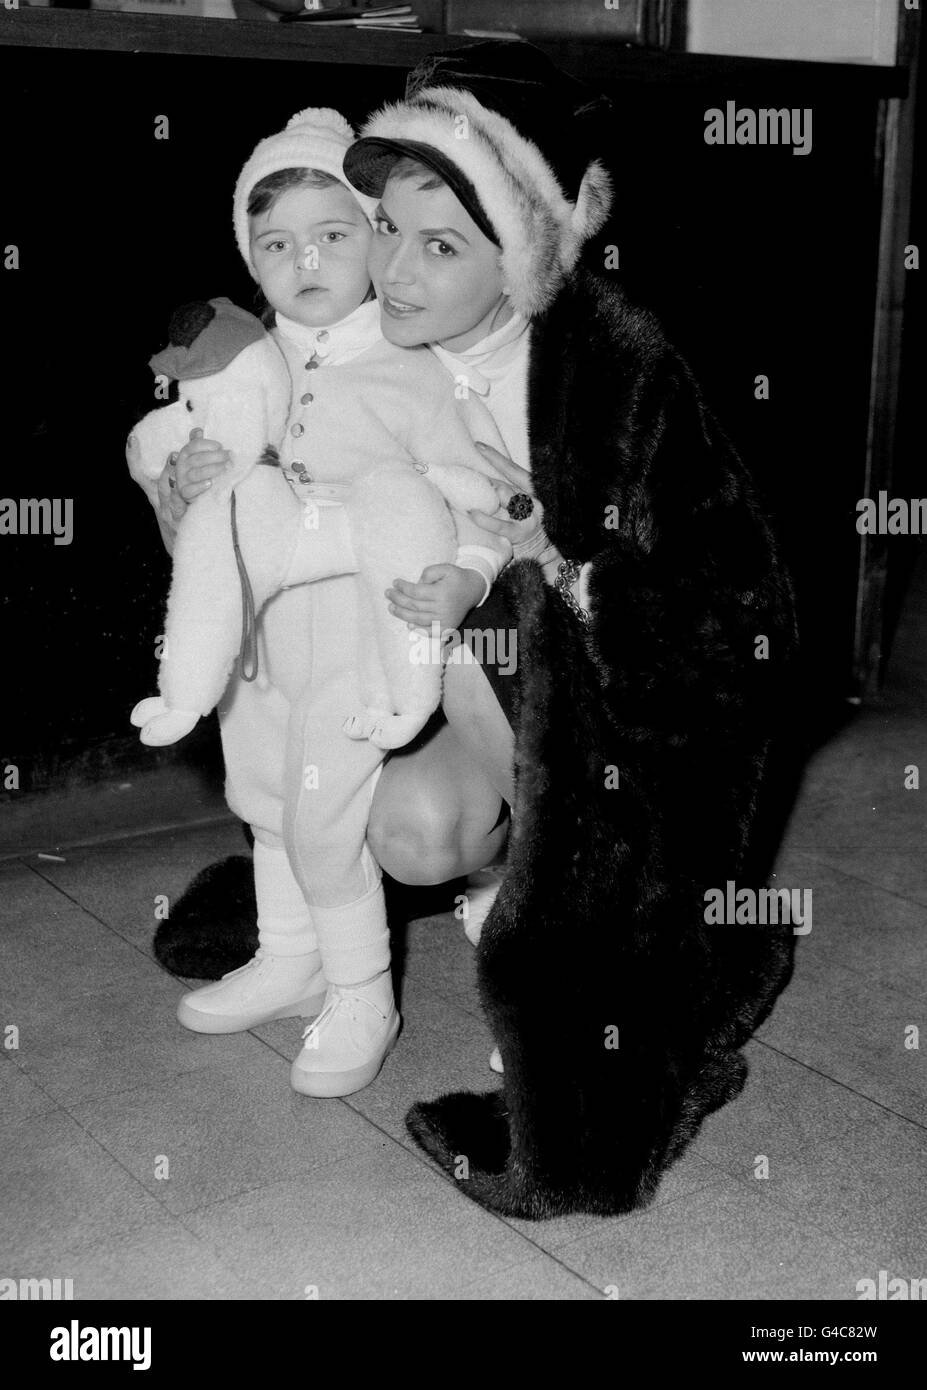 PA NEWS PHOTO 4/12/59 HUNGARIAN BORN ACTRESS EVA BARTOK WITH HER DAUGHTER DEANNA GRAZIA AT HEATHROW AIRPORT IN LONDON BEFORE FLYING TO BERLIN, GERMANY WHERE SHE IS TO STAR IN A FILM CALLED 'A STUDENT PASSES BY' Stock Photo